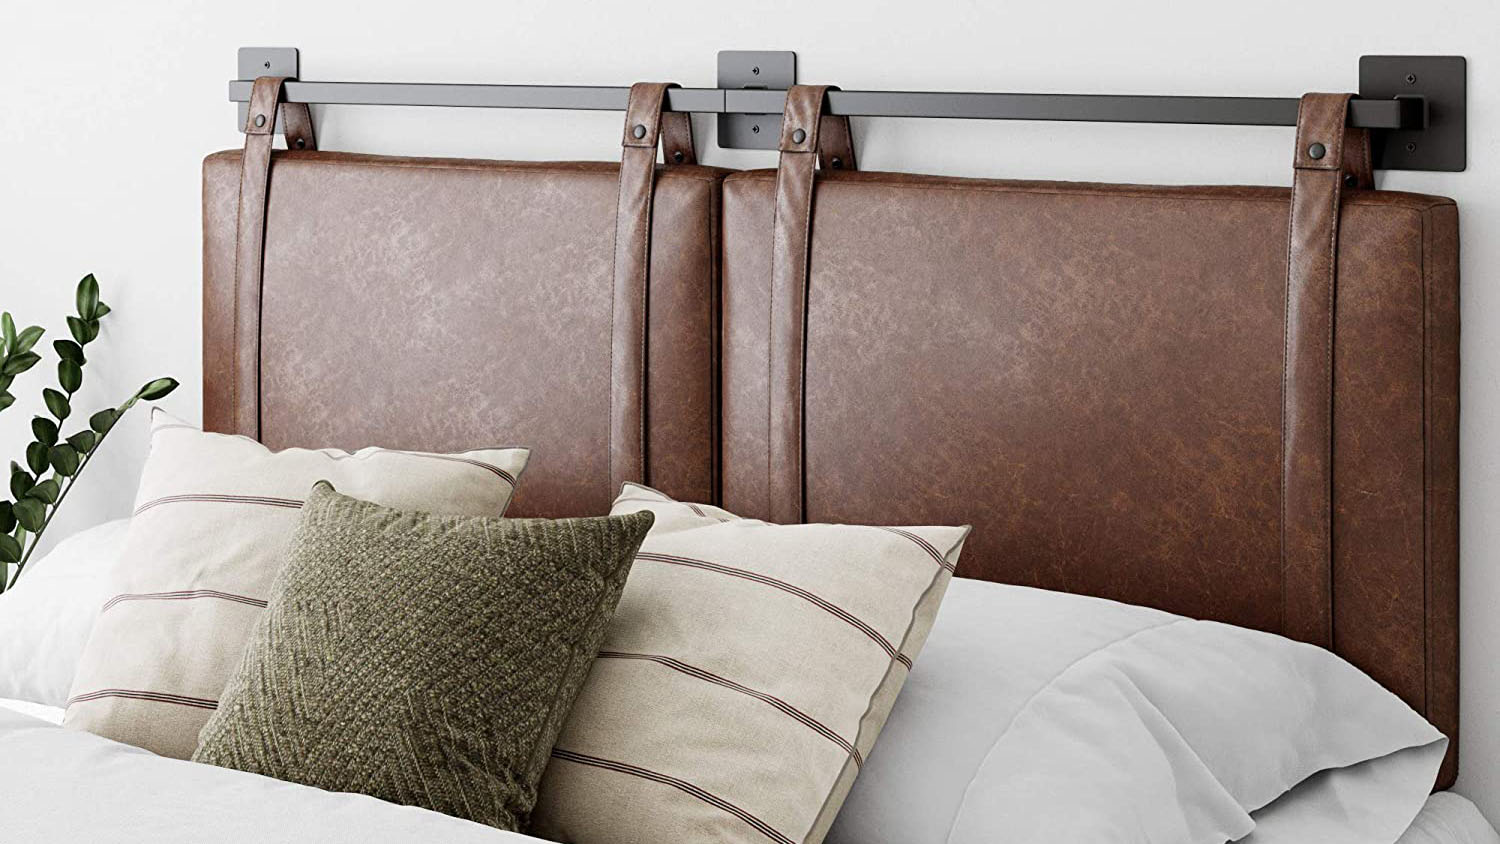 15 Best Headboards For Adjustable Beds, How To Attach A Headboard Tempurpedic Adjustable Bed